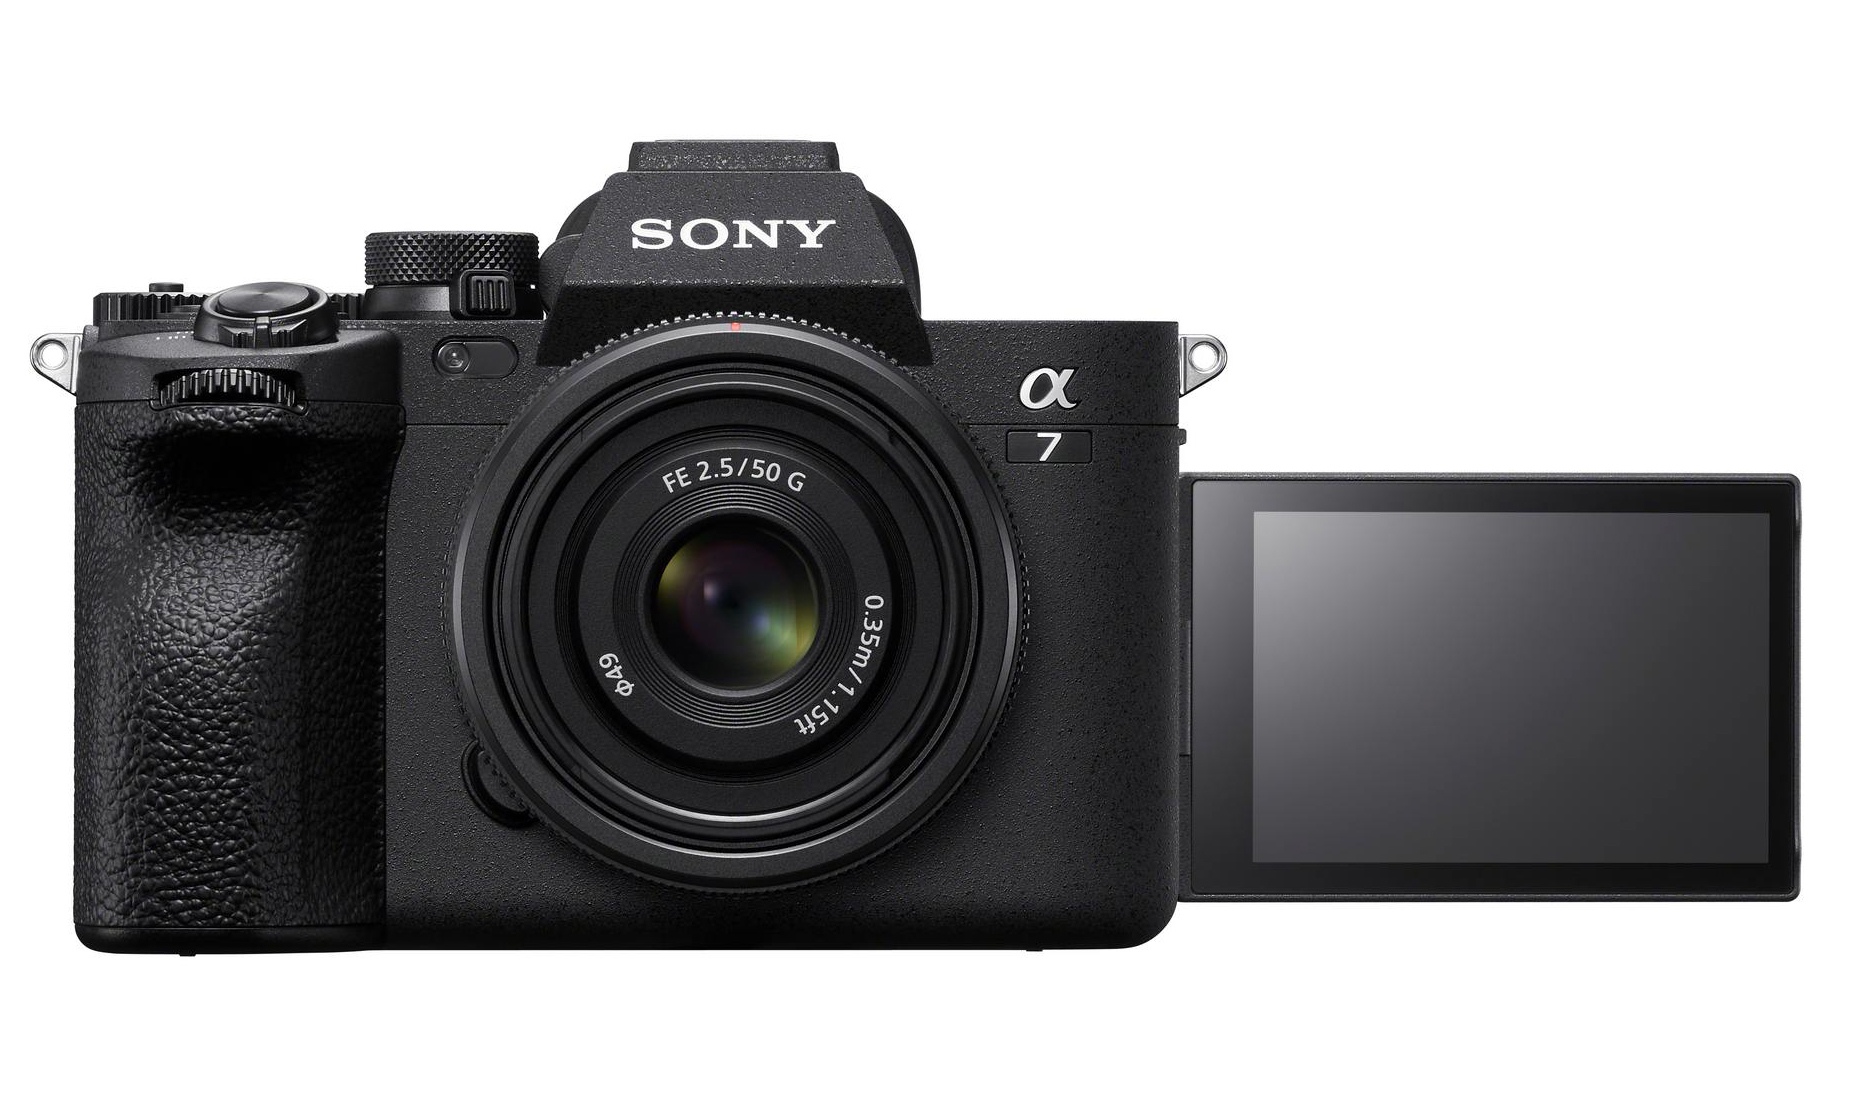 Sony’s A7 IV camera arrives with a 33-megapixel sensor and 4K 60p video